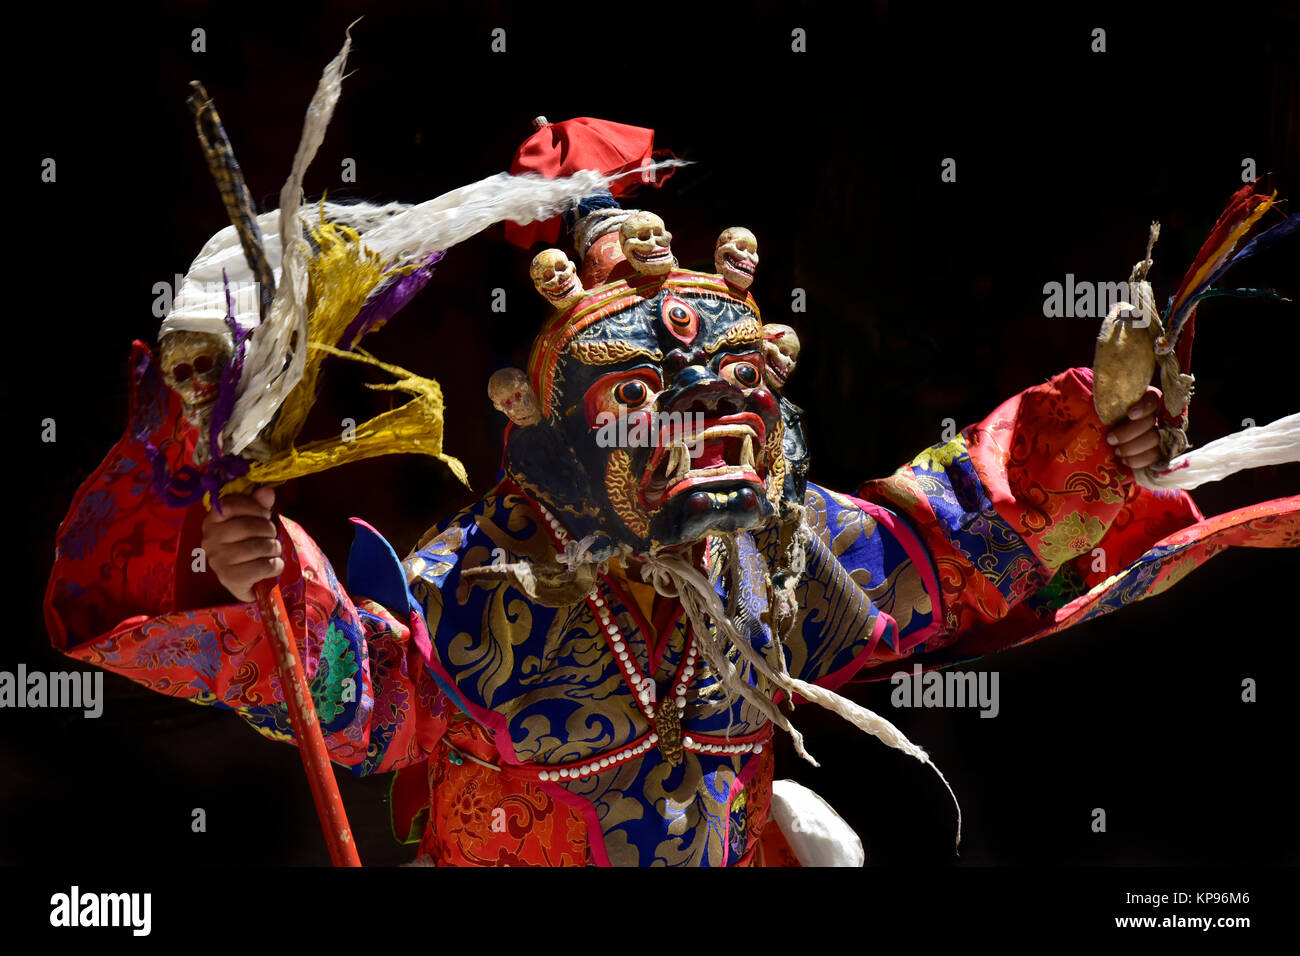 Ancient Tibetan sacral mask Palden Lhamo: a blue mask with small human skulls, bright red flags at the top, a wand in hand, the Himalayas. Stock Photo